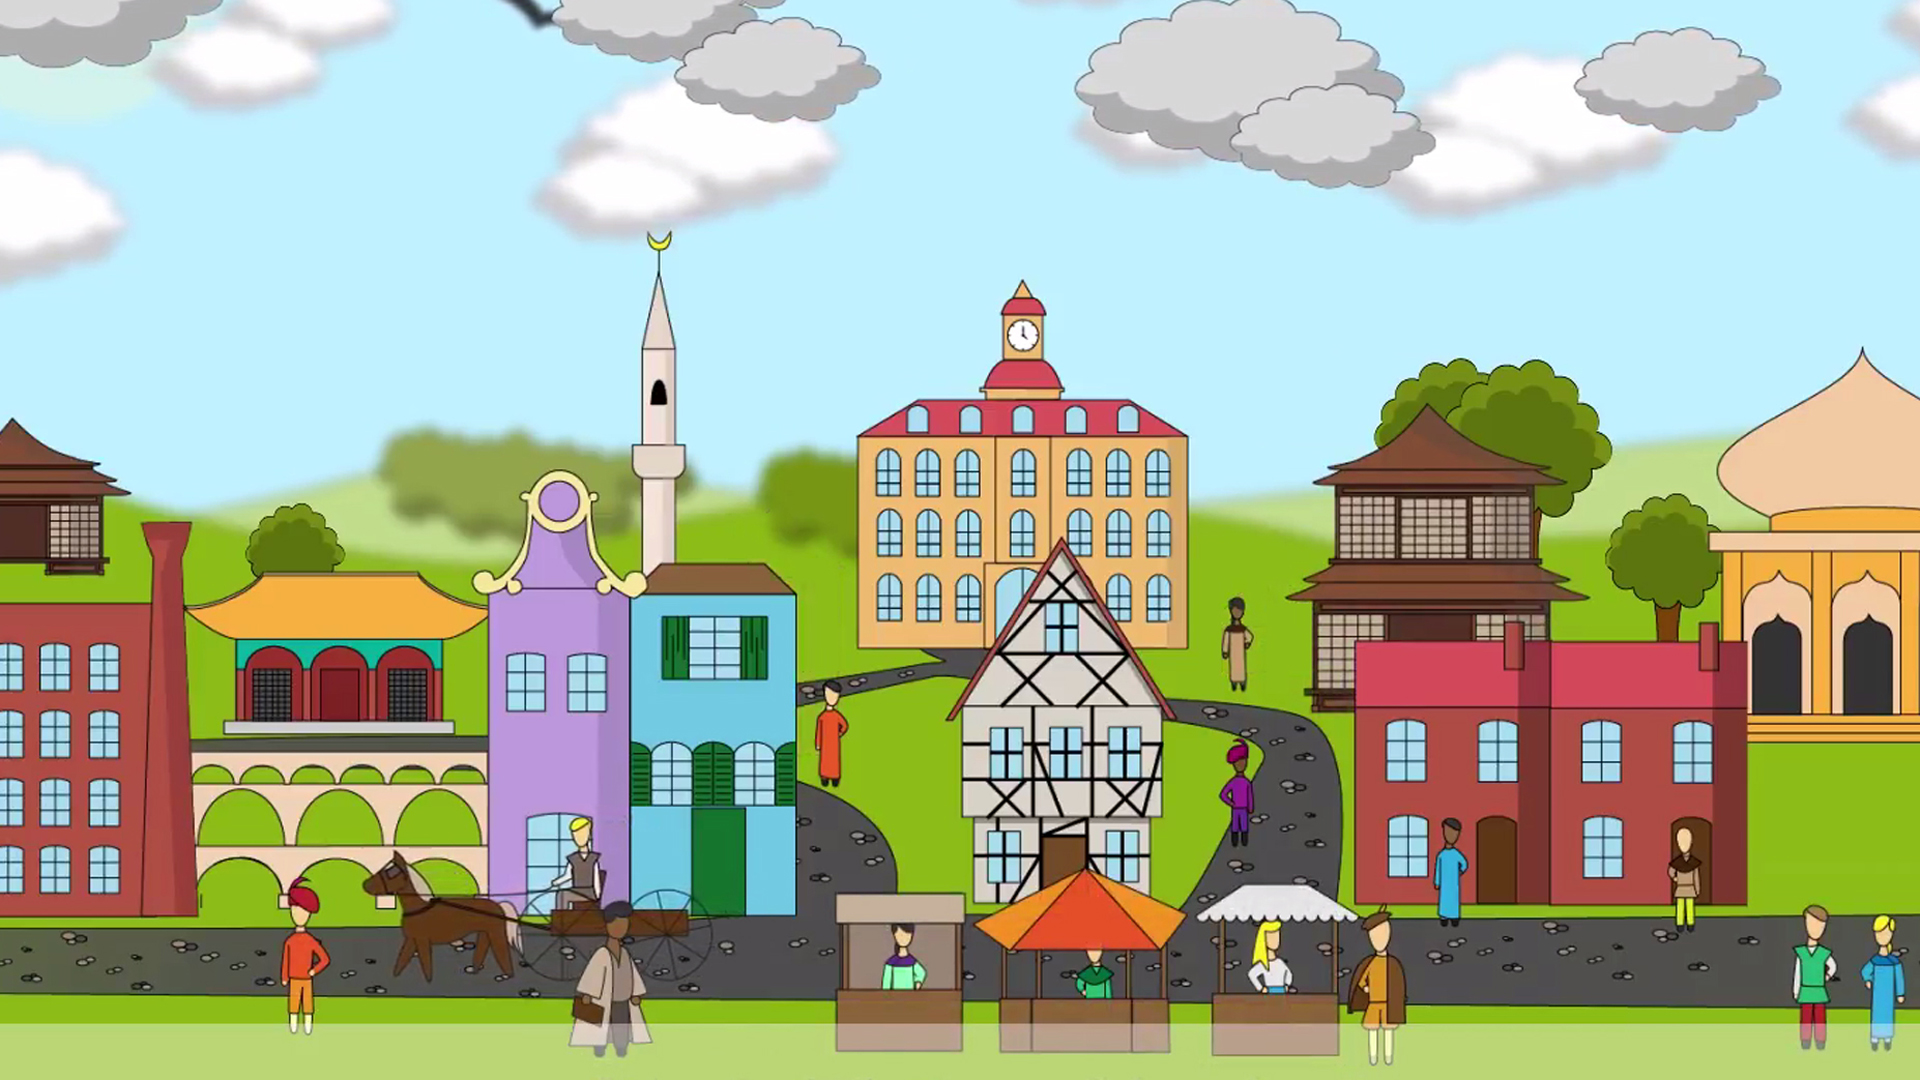 Still from the BMZ video "Cities for a better world"